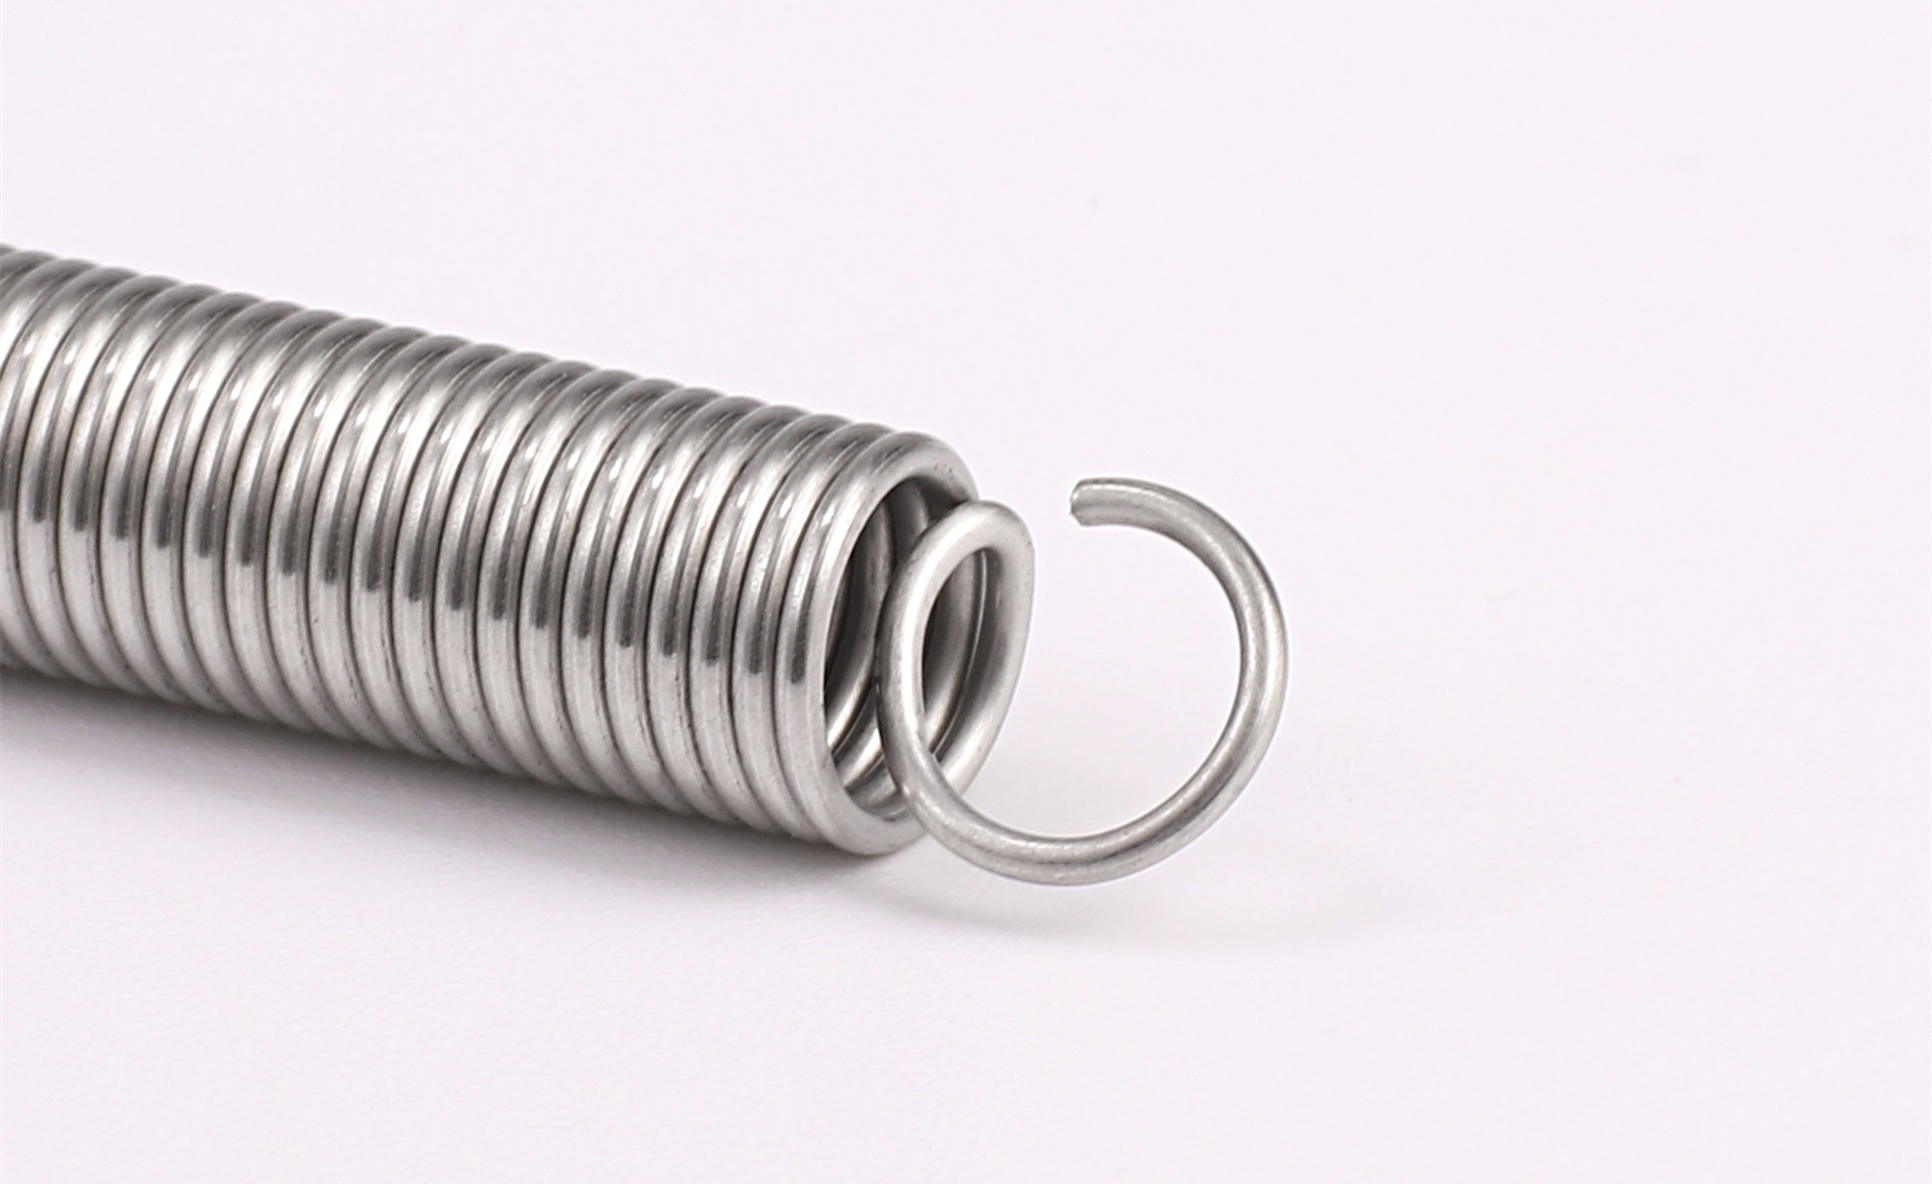 Coil extension, torsion spring manufacturing